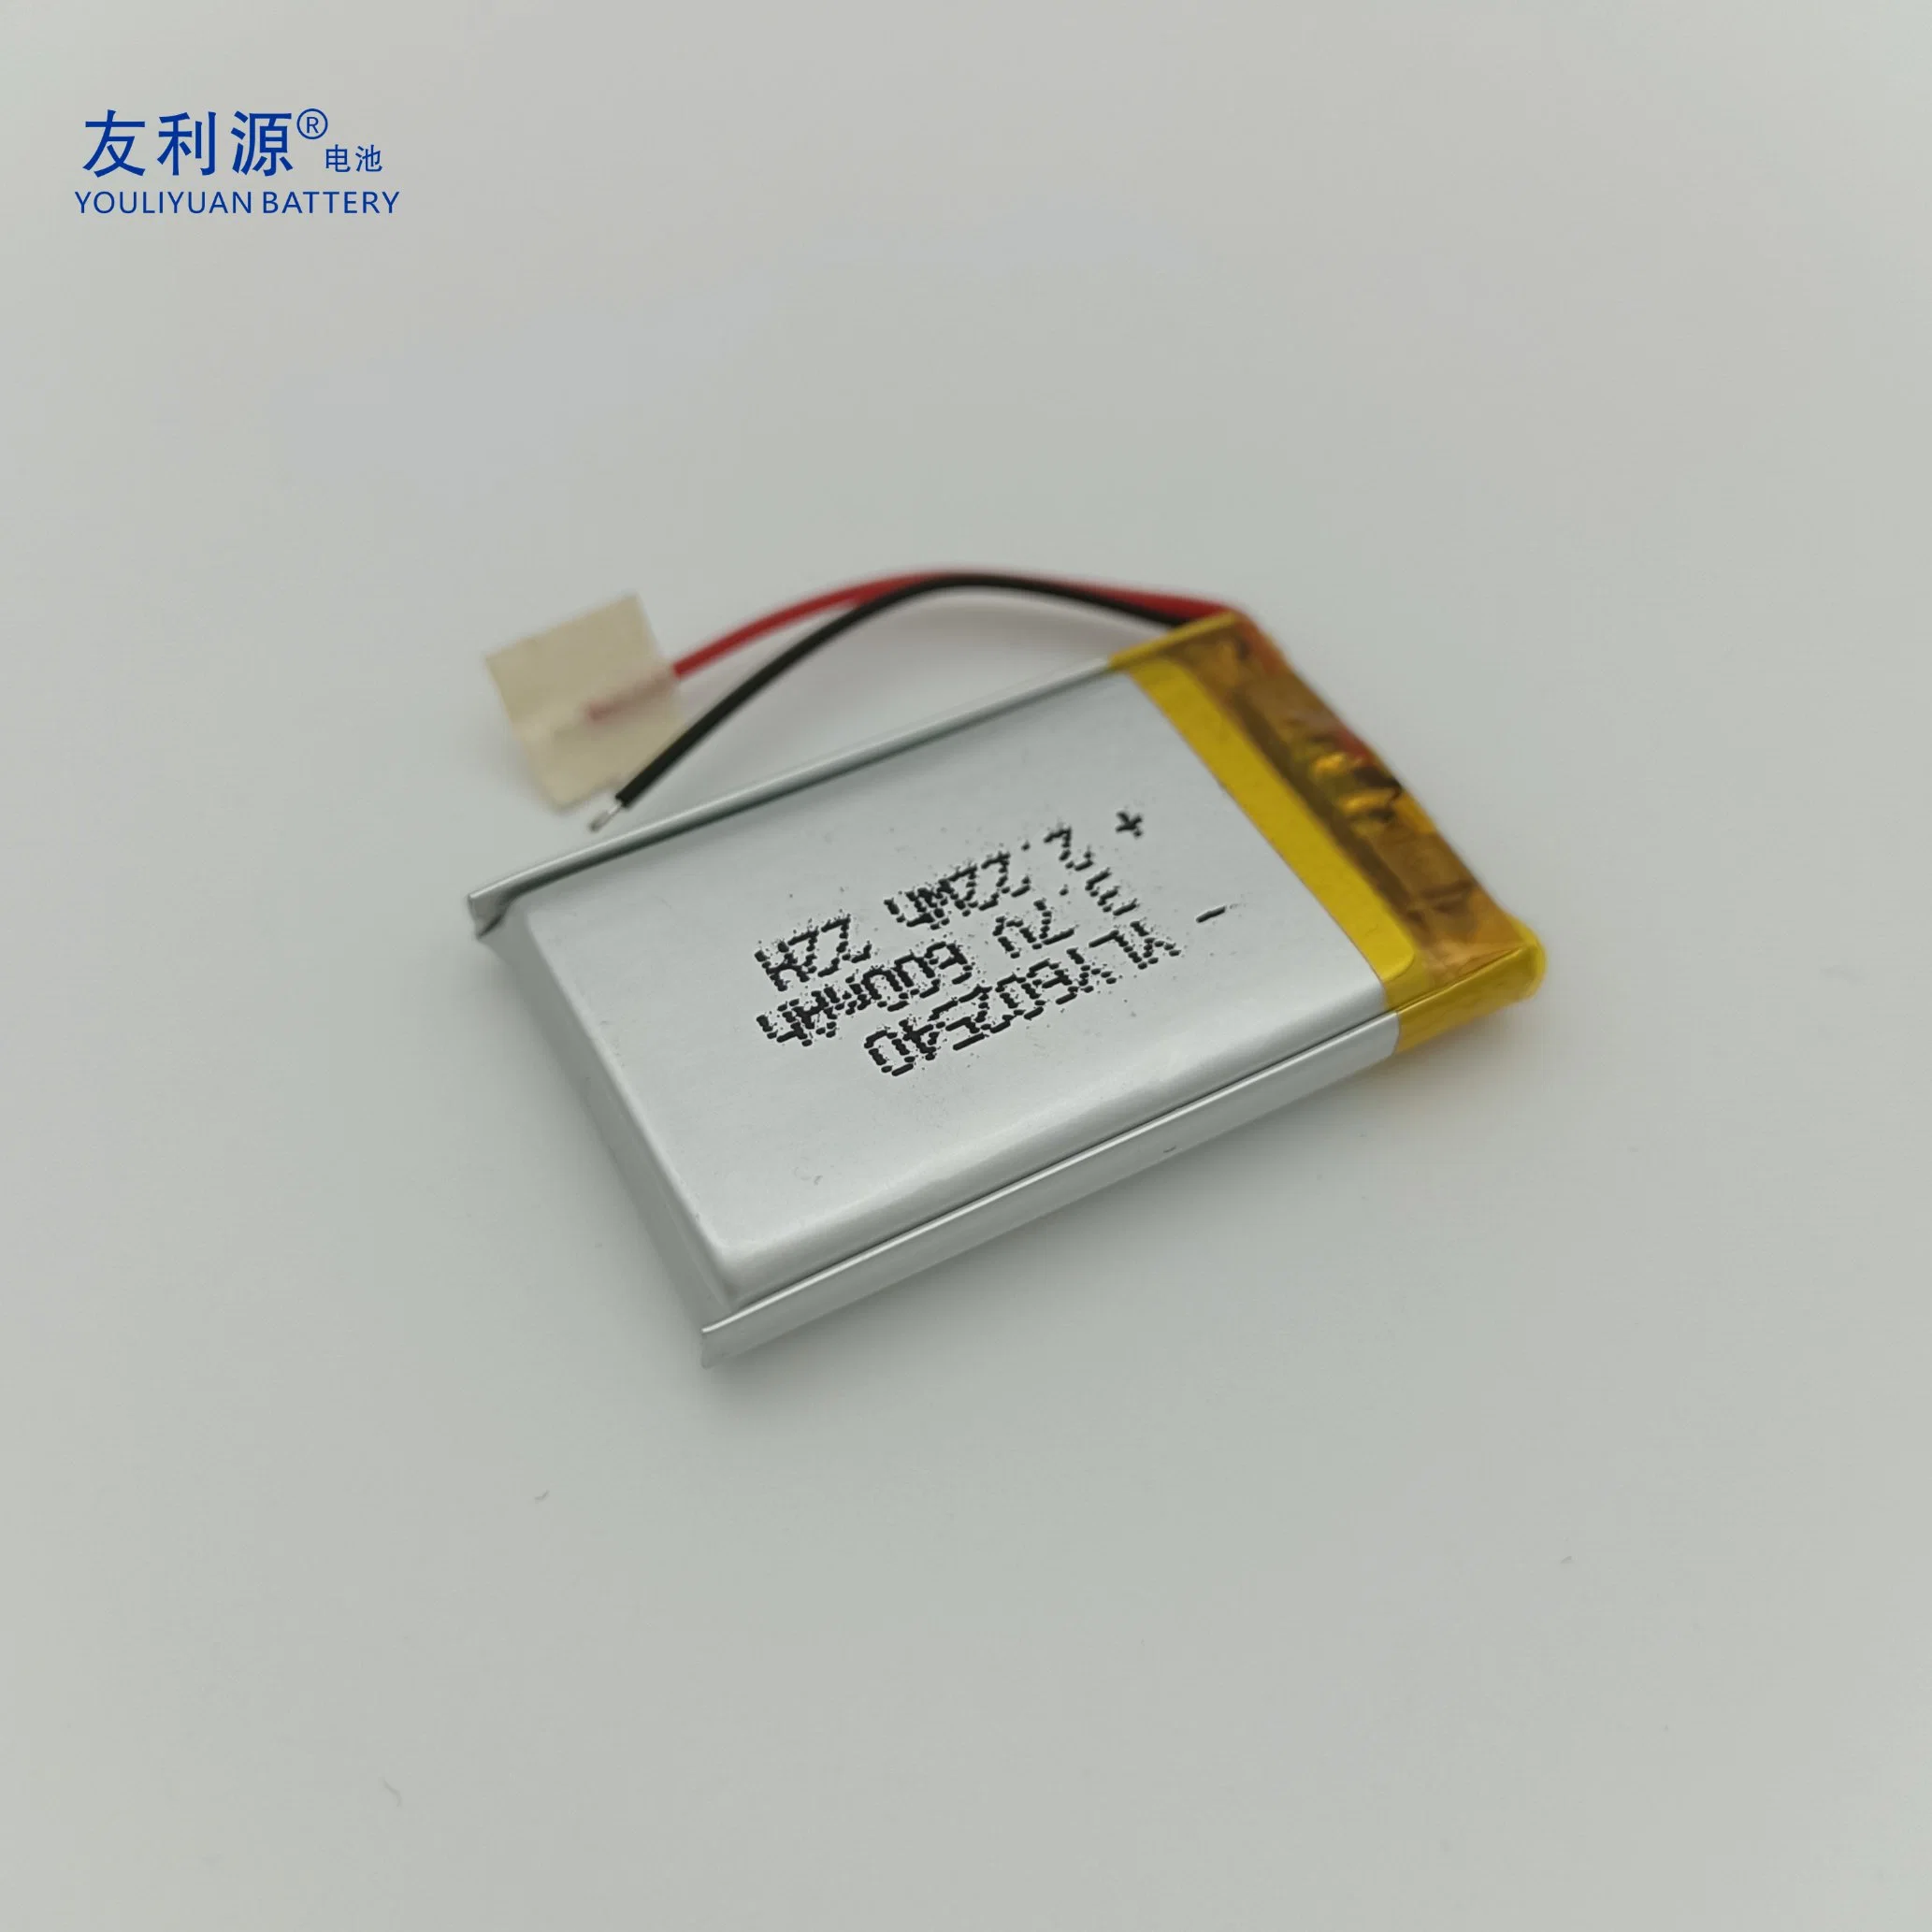 Factory Directly CB Kc 602540 Lithium Batteries Ultra Thin Small 3.7V 600mAh Li Polymer Rechargeable Lipo Battery Cell Phone Battery for Digital